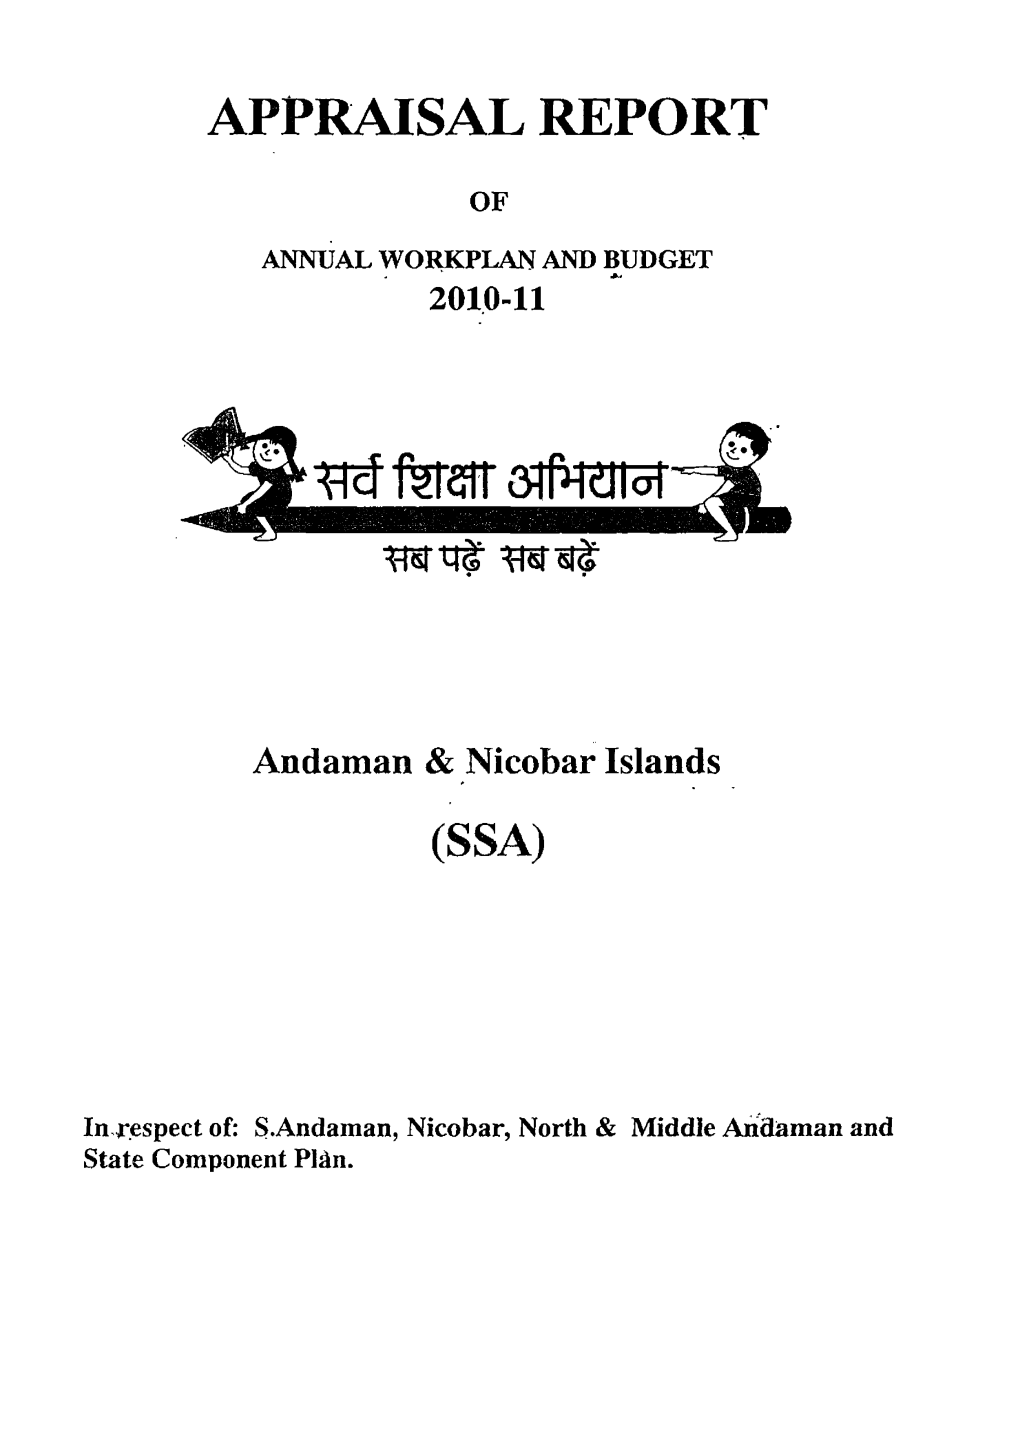 Appraisal Report of Annual Workplan and Budget 2010-11 Andaman